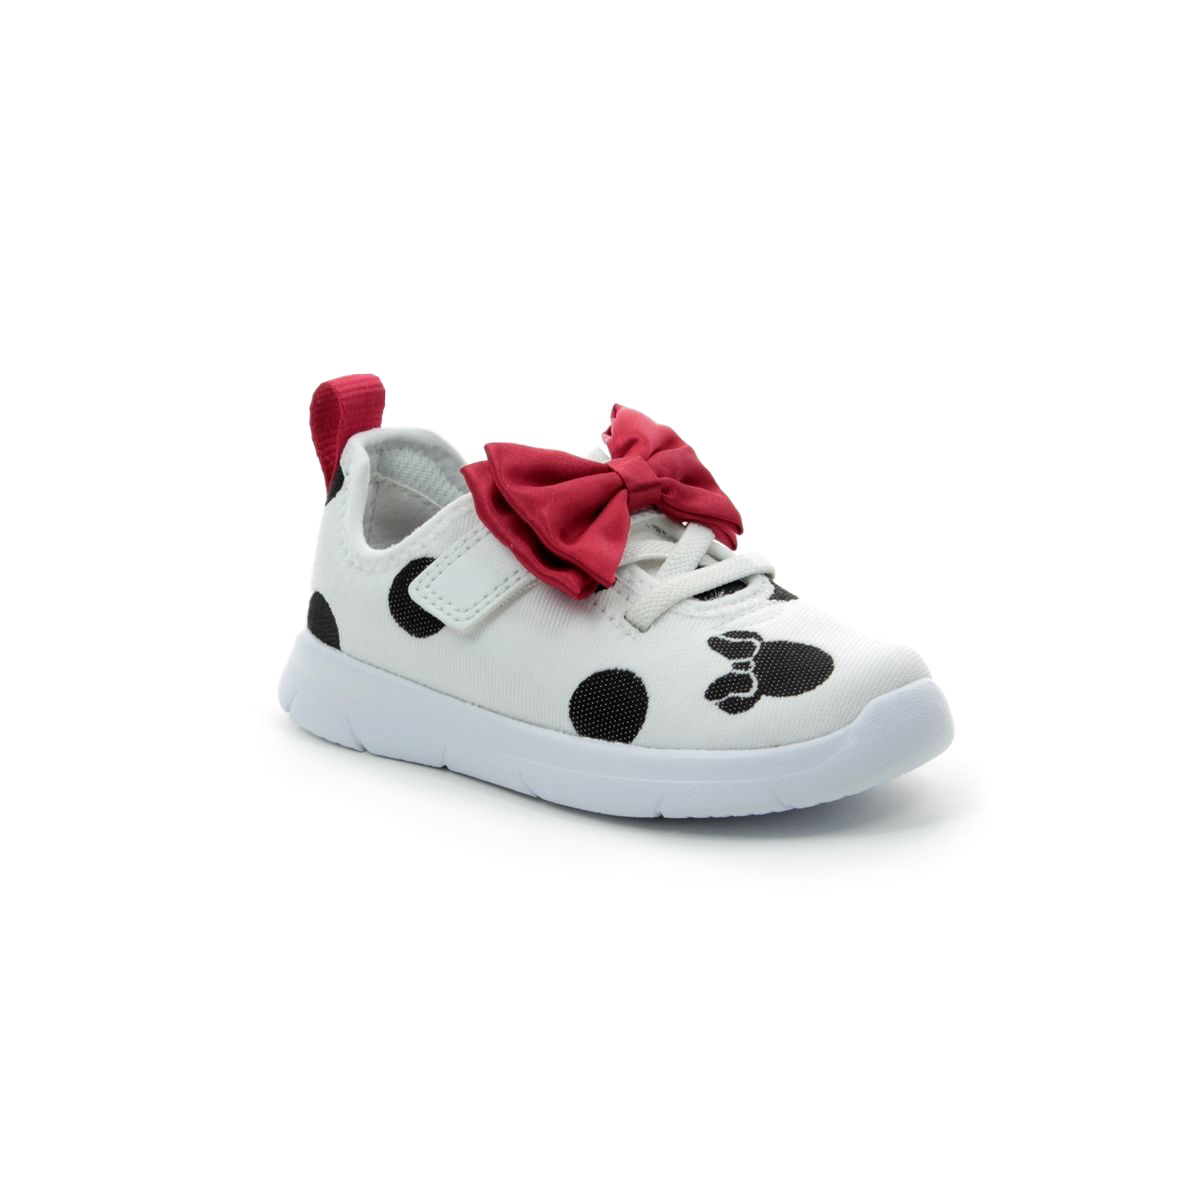 Clarks Ath Bow T Disney F Fit White 